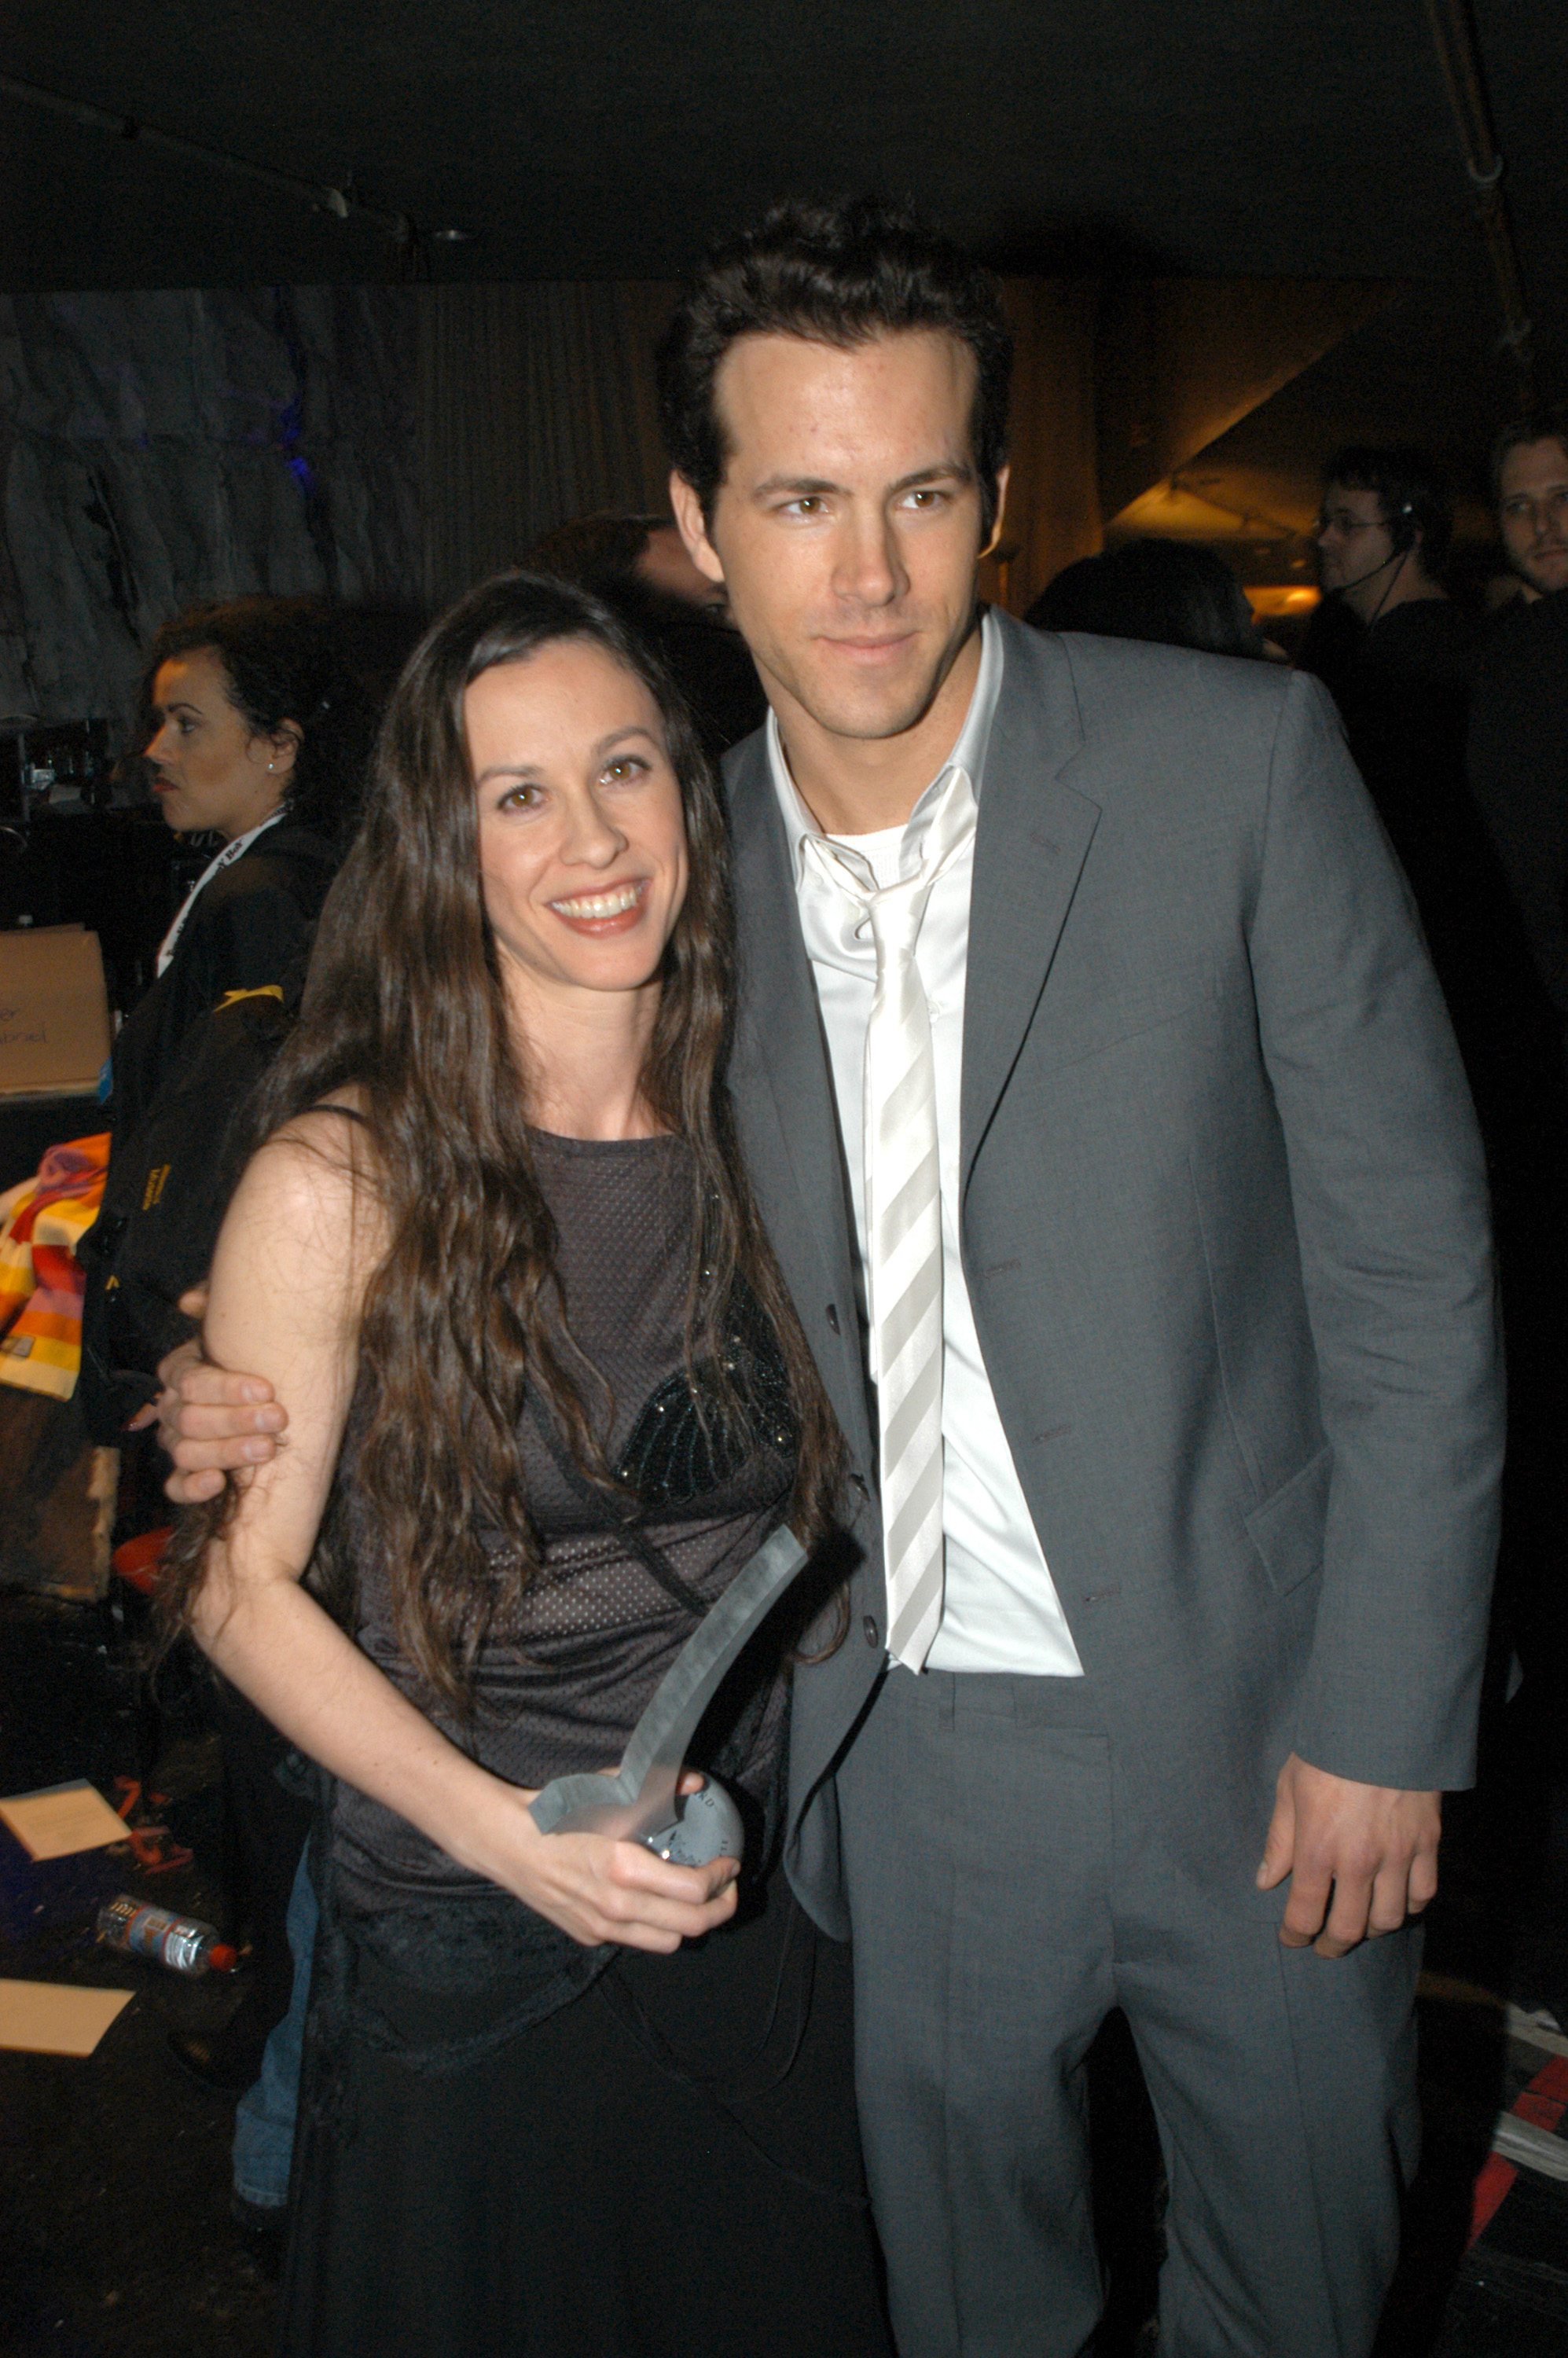 Alannis in a mesh top and holding an award, and Ryan in a suit with an unbuttoned shirt, with his arm around her